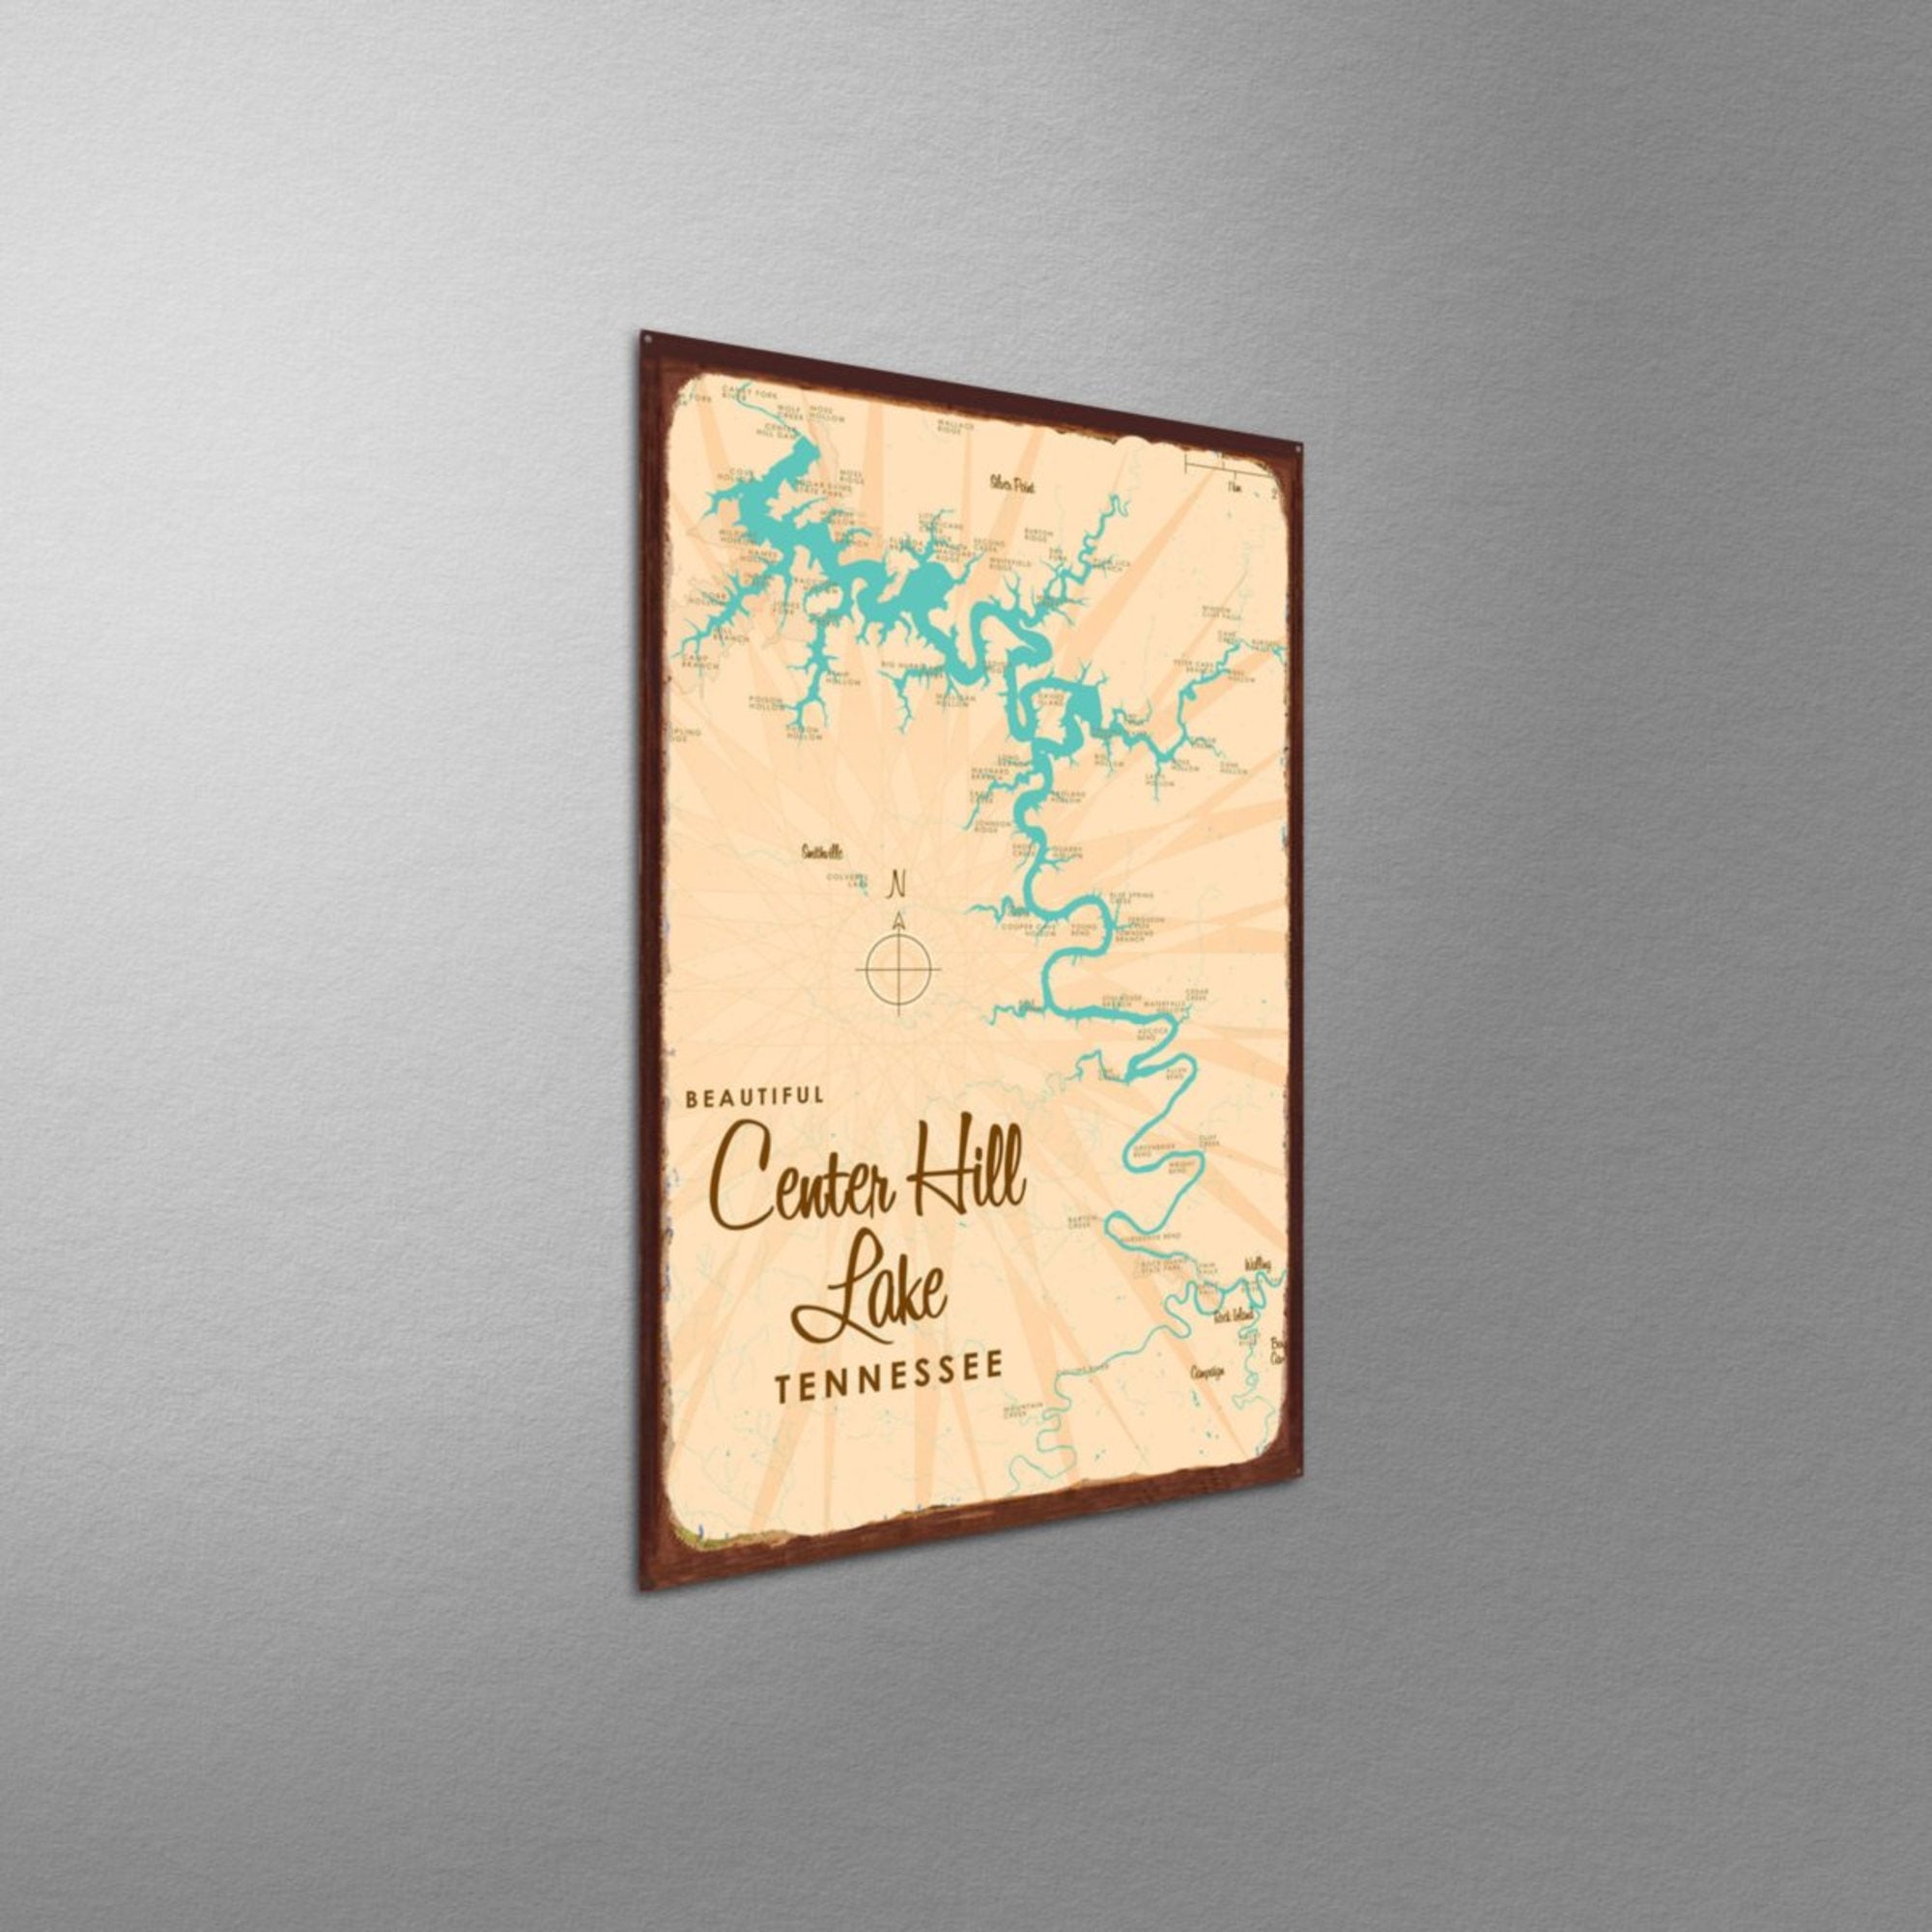 Center Hill Lake Tennessee, Rustic Metal Sign Map Art